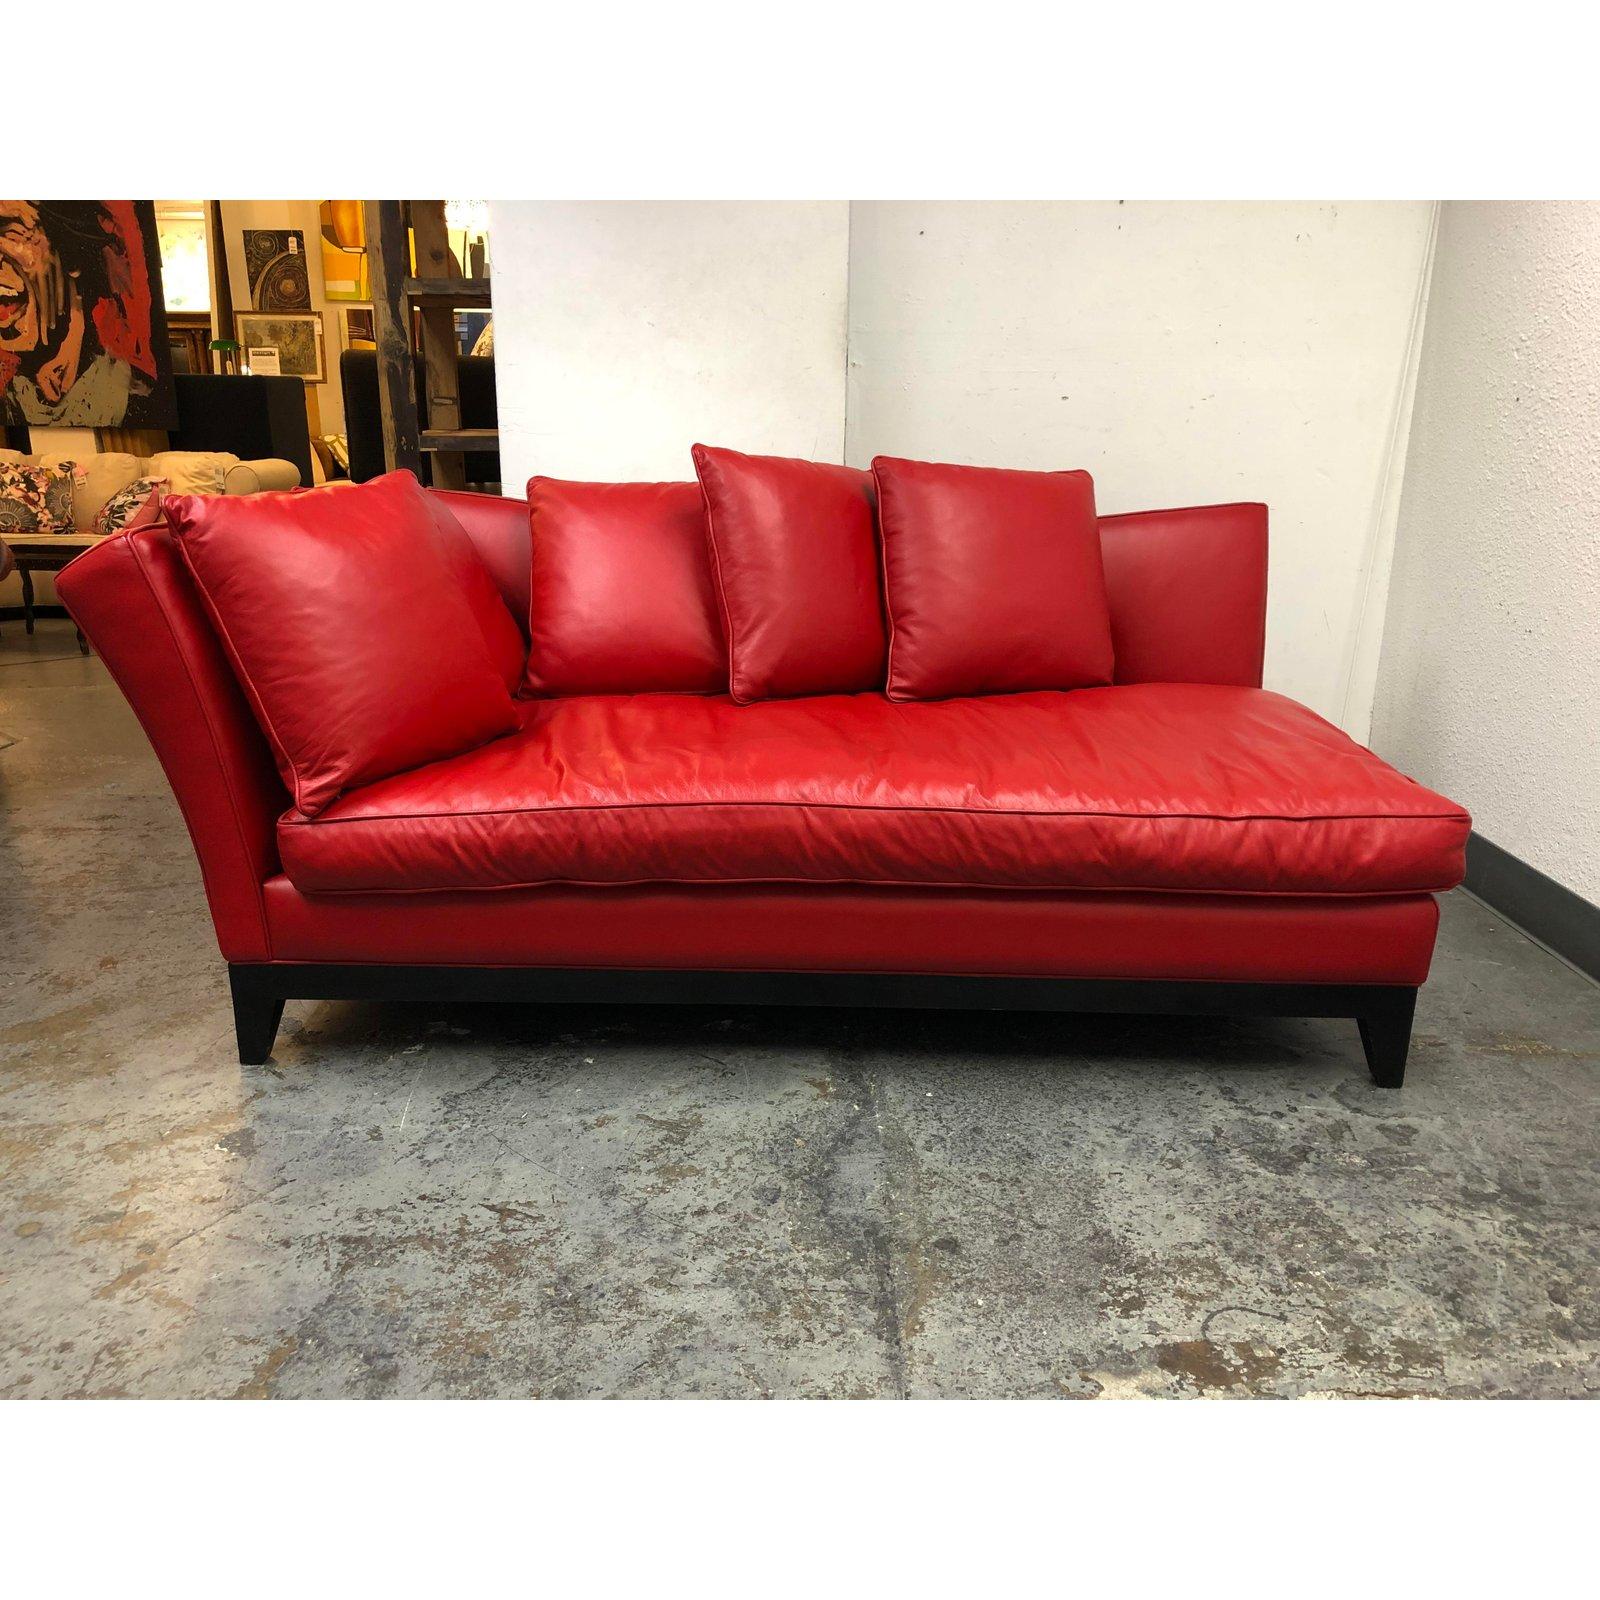 A custom lounge chaise sofa. A sleek and luxurious design. Upholstered in a deep cherry red leather. The base is wood with tapered legs in a black finish. Accompanied with five square back cushions and a single seat cushion. The pillow inserts are